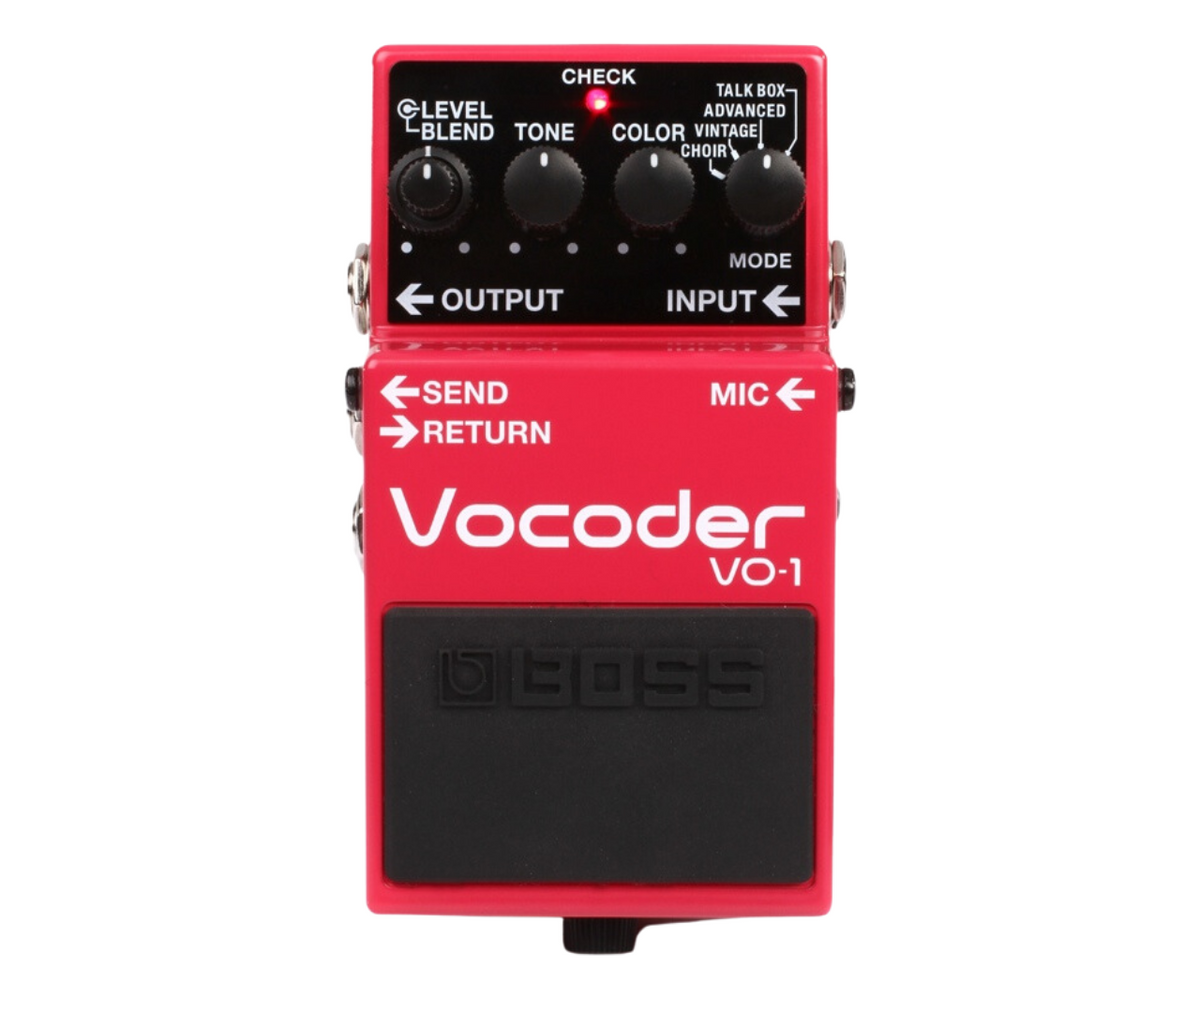 BOSS VO-1 Vocoder Best Audio Effects Powerful Vocal Expression for Guitar and Bass